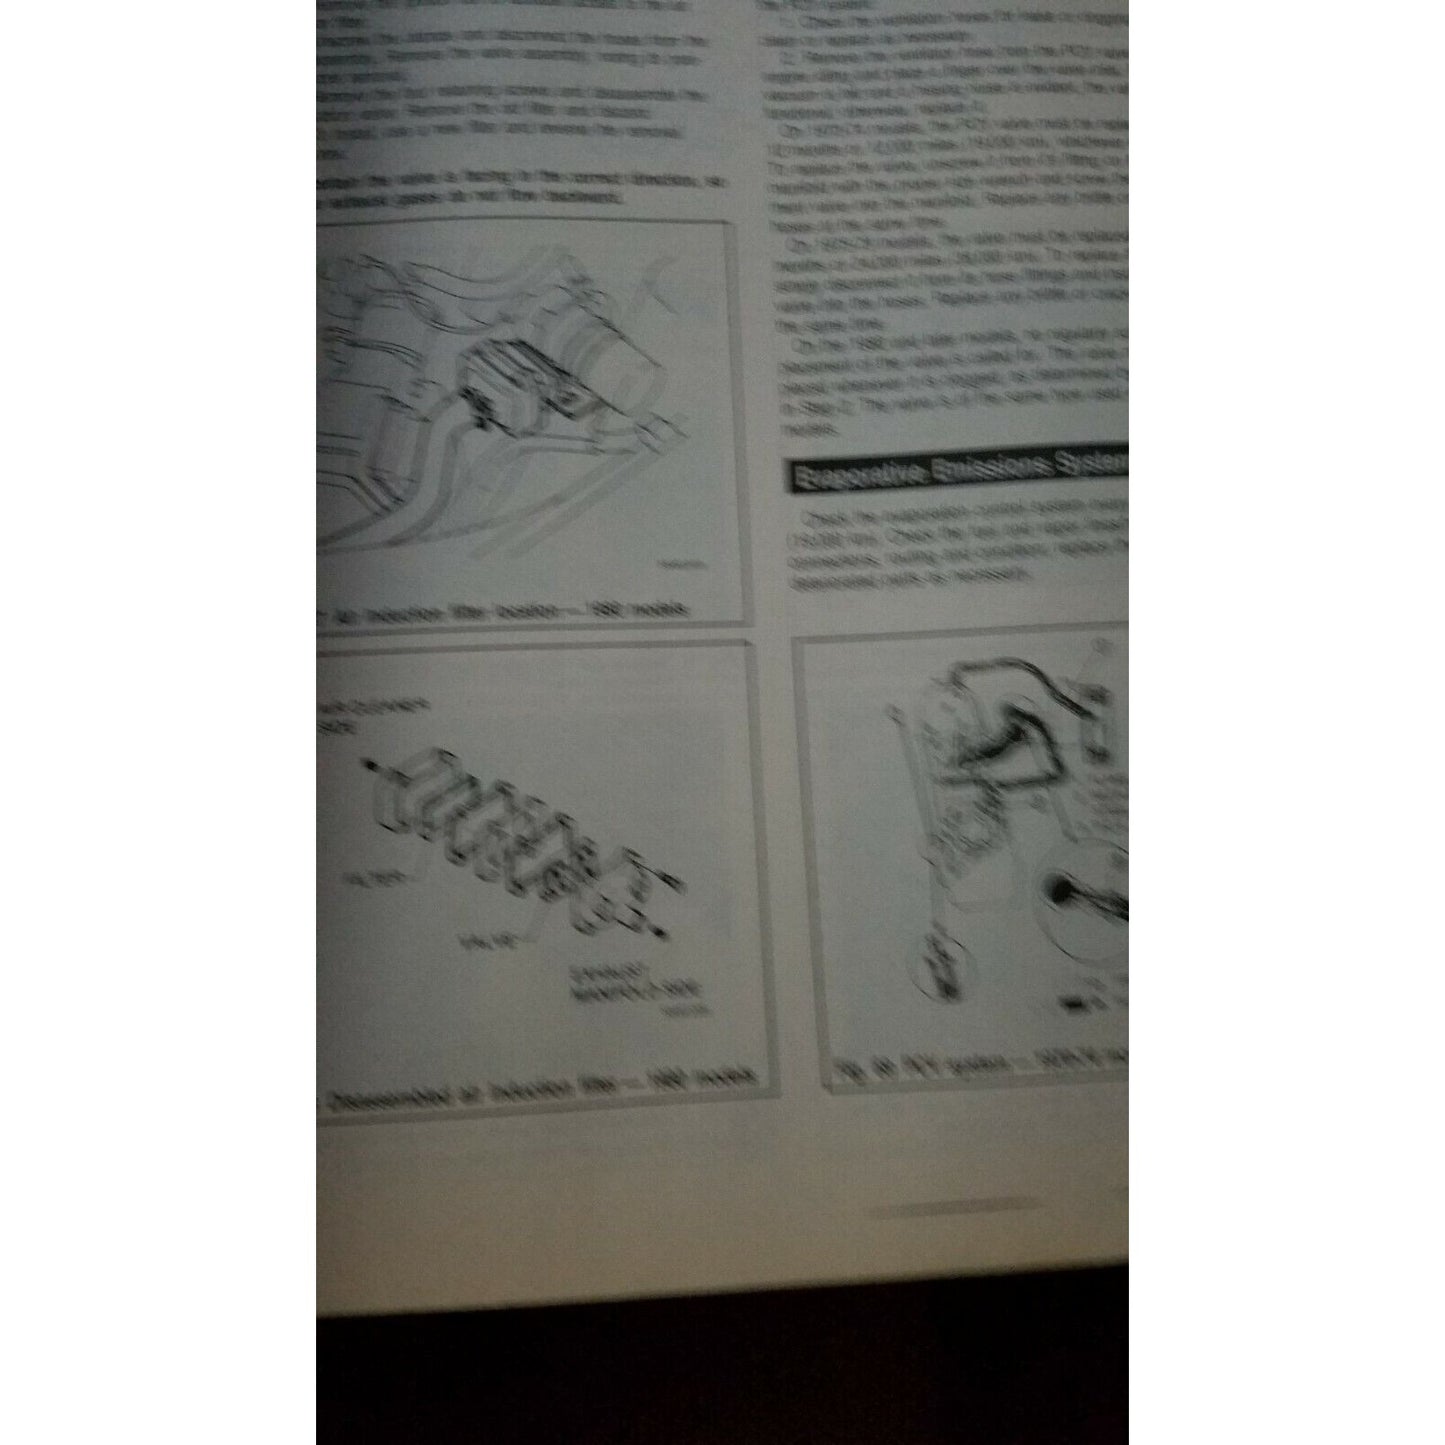 1970 - 88  Chilton's Nissan Z ZX   Repair Manual # 52800 Automobile Wiring